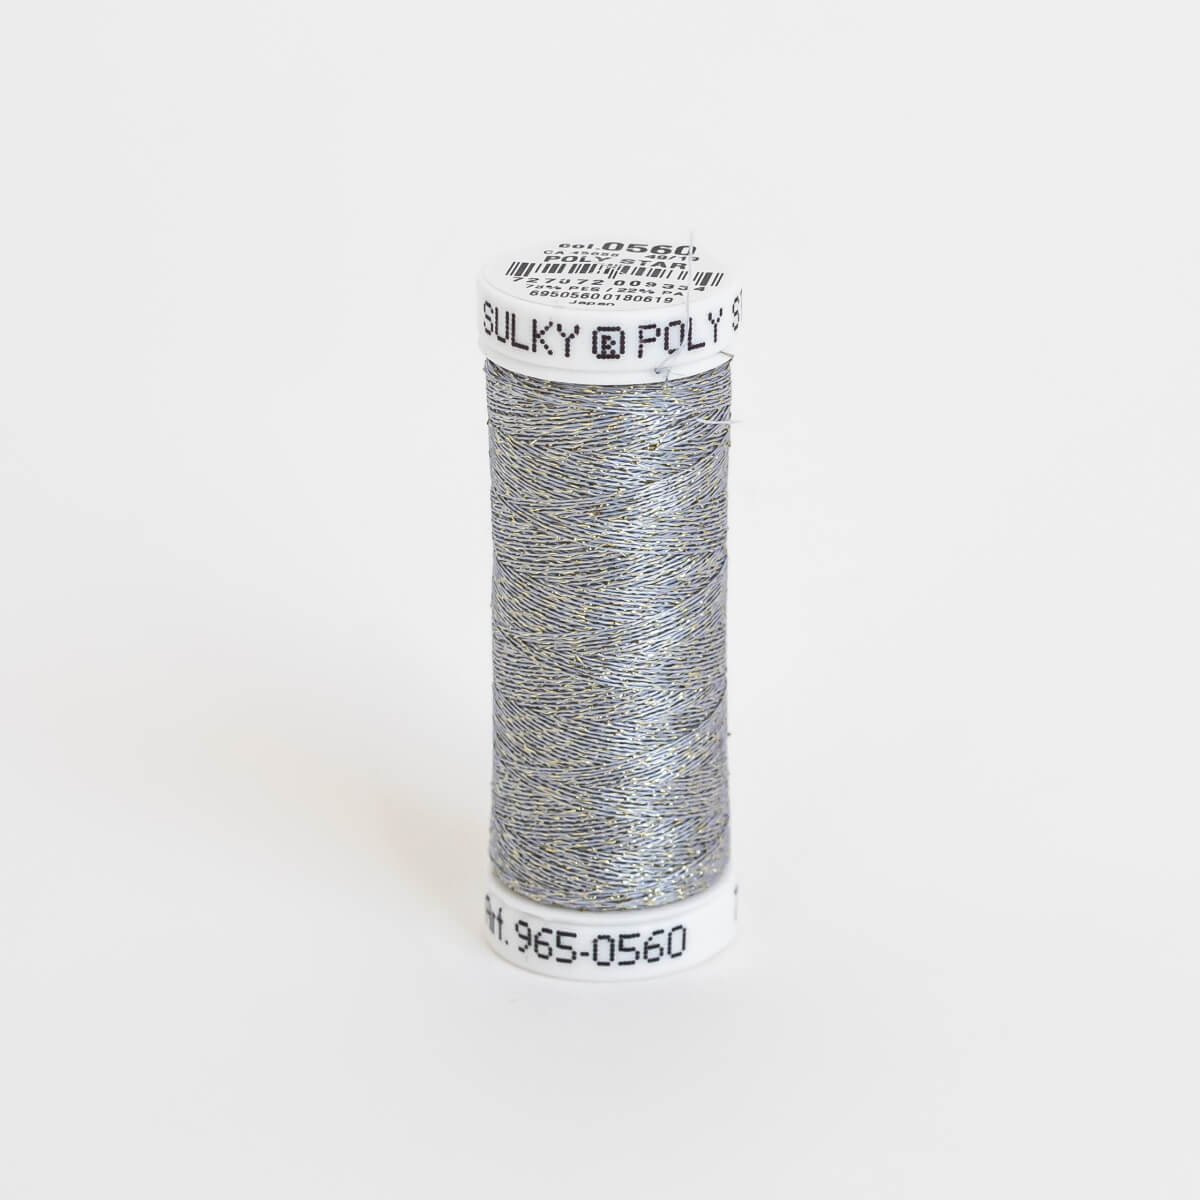 SULKY POLY SPARKLE (STAR) 30, 265m/290yds Snap Spools - Colour 0560 White with Gold Sparkle